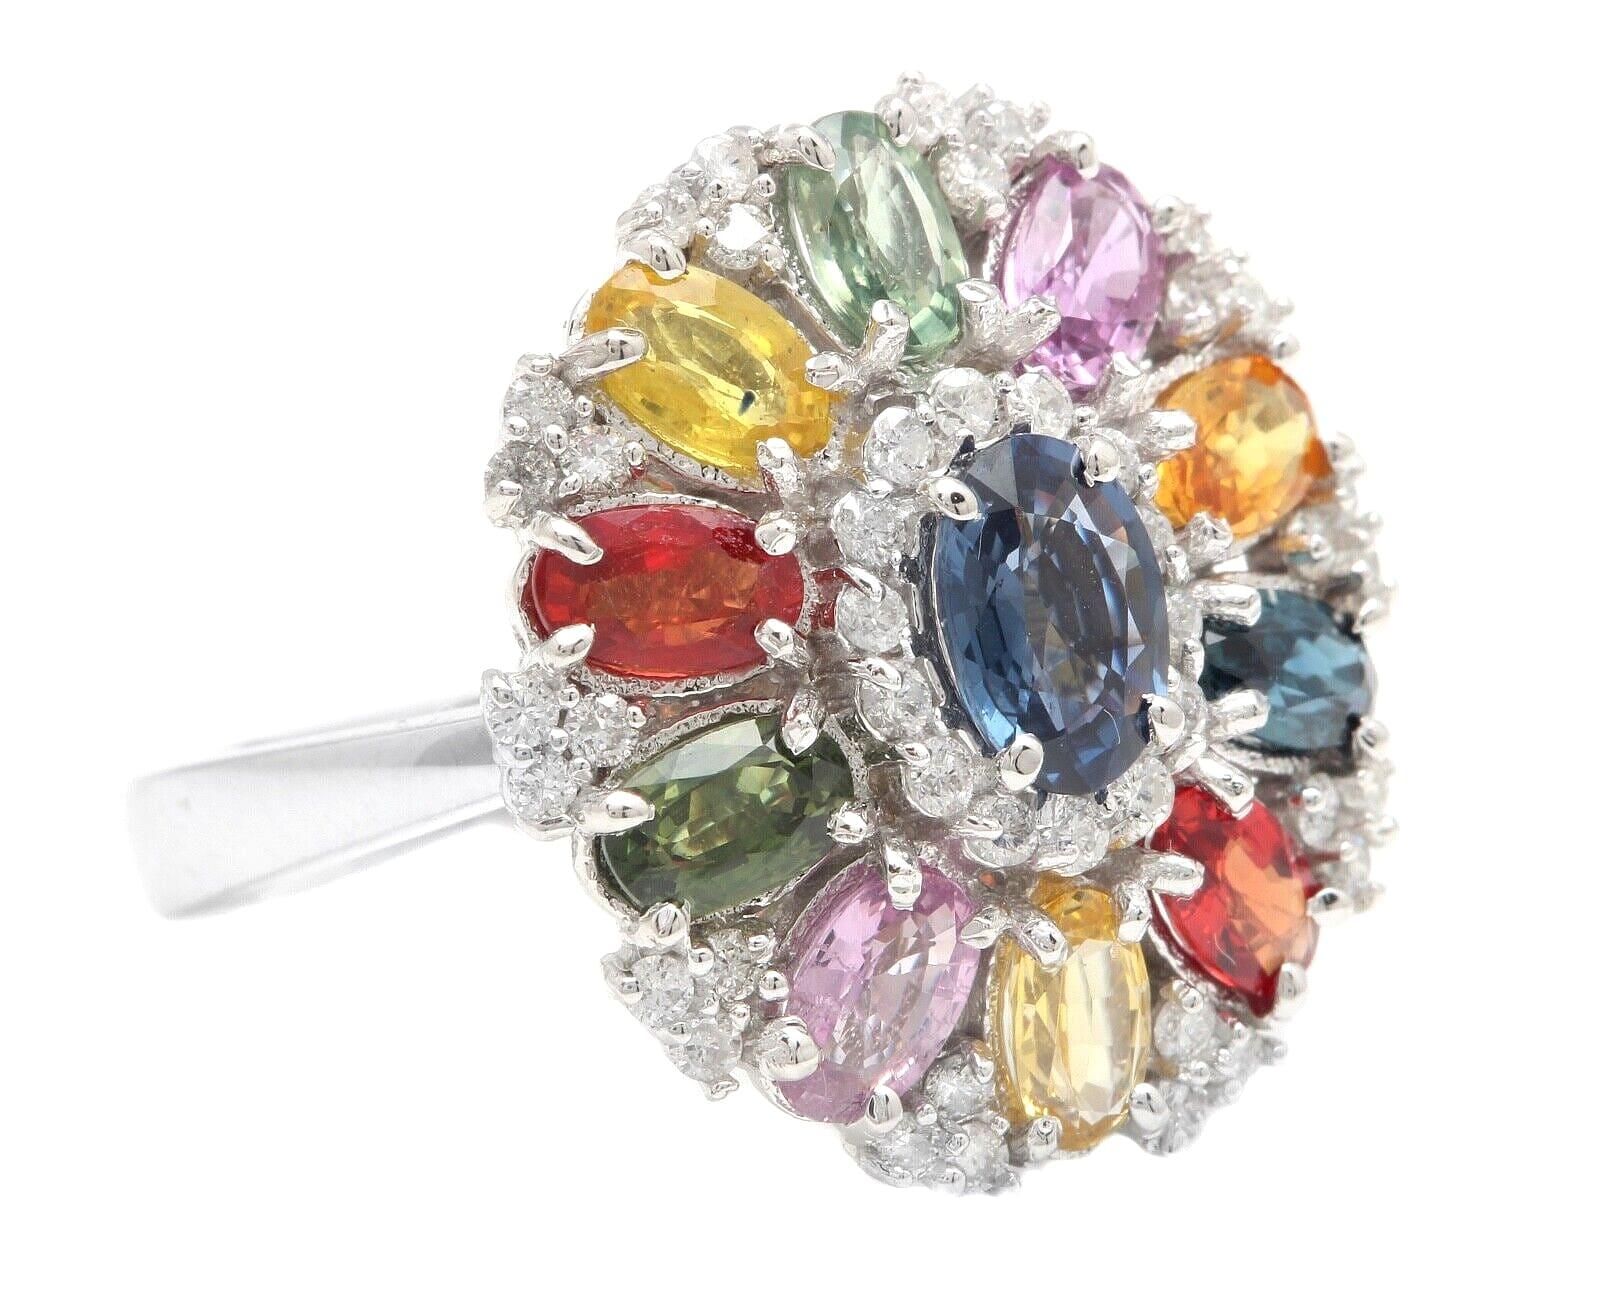 5.00 Carats Natural Multi-Color Sapphire and Diamond 14K Solid White Gold Ring

Suggested Replacement Value: $7,000.00

Total Natural Oval Cut Multi-Color Sapphires Weight is: Approx. 4.44 Carats 

Center Blue Sapphire Measures: 7.00 x 5.00